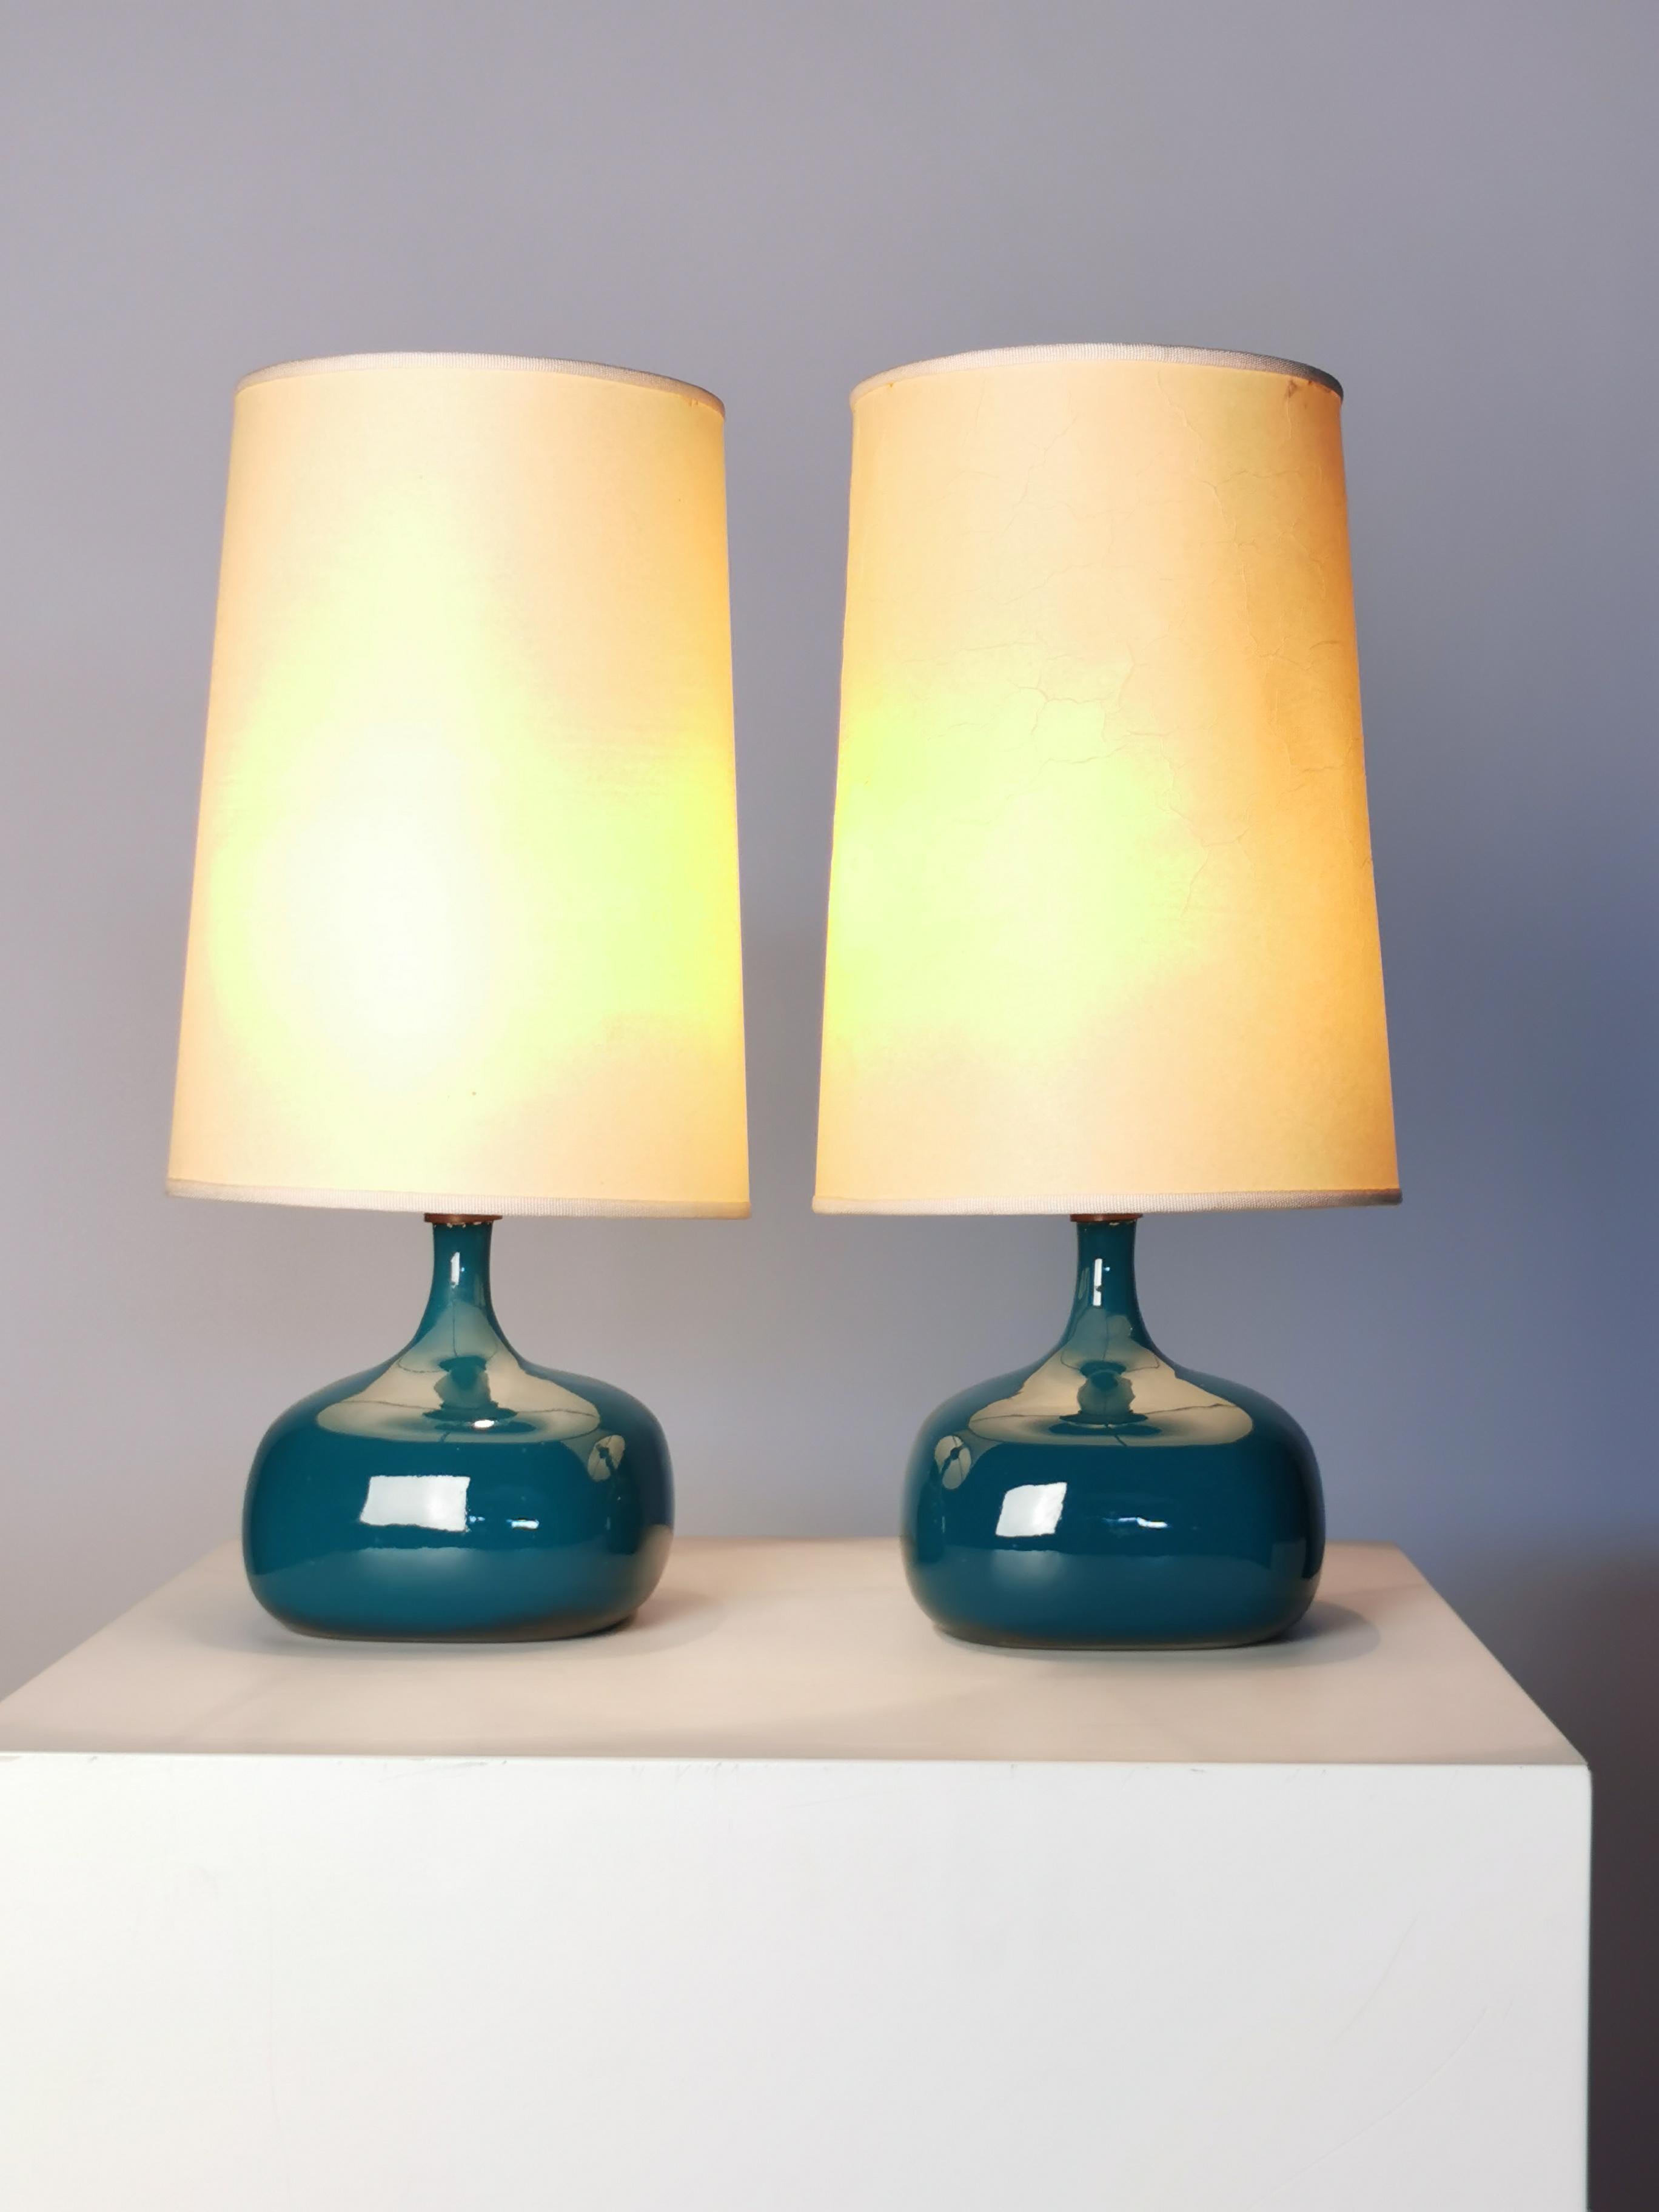 Rare pair of table-lamps by French ceramic artists Jacques & Dani Ruelland.
Blue Turquoise enameled glaze, mod. GC3.
France, 1960s, original shades.
Measures: Height of the base 13.5cm, with shade 33cm.